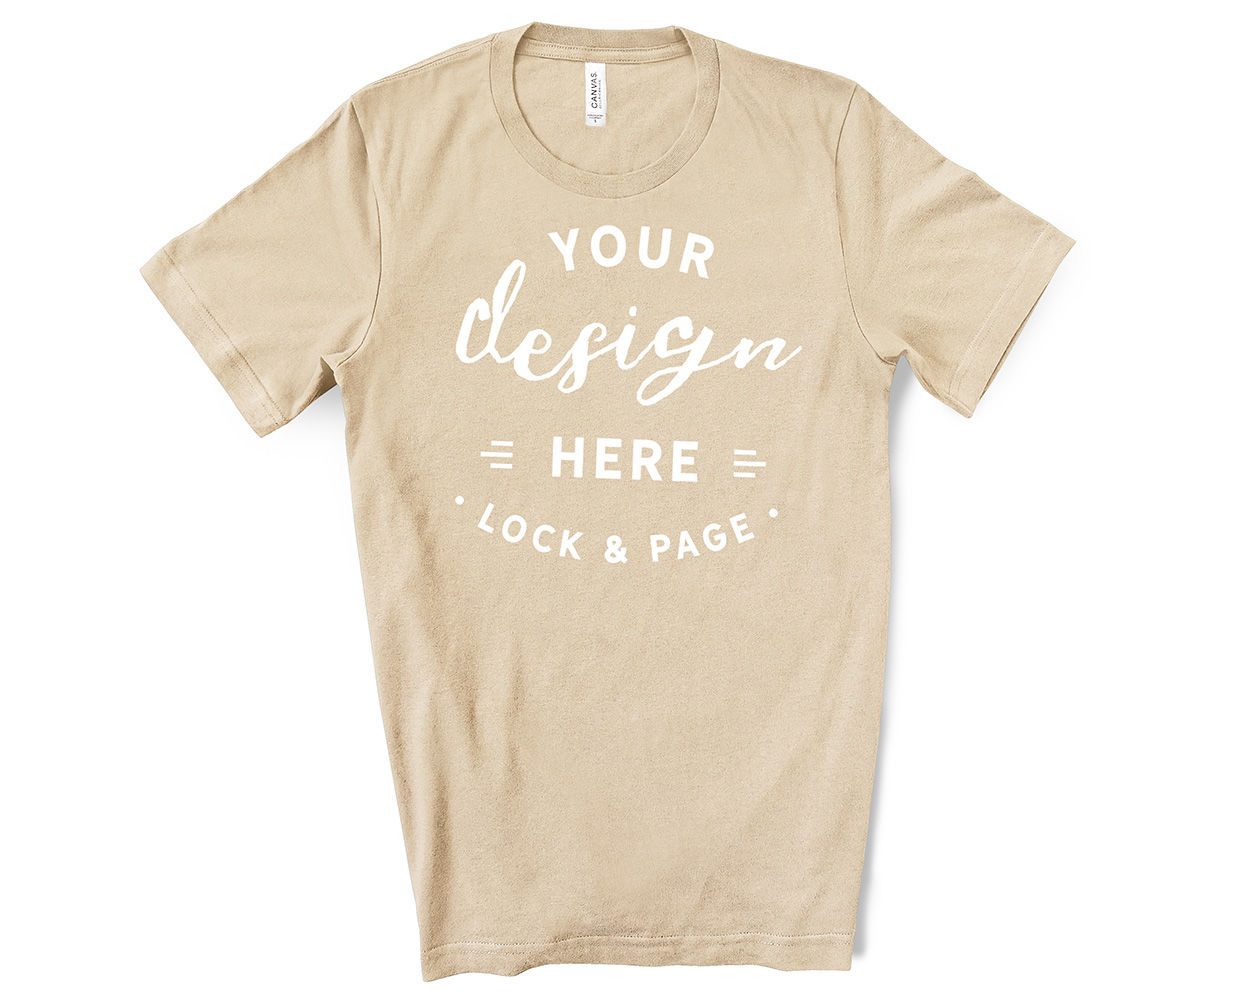 Download Unisex Bella Canvas 3001 T-Shirt Mockup Bundle On White Background By Lock and Page ...